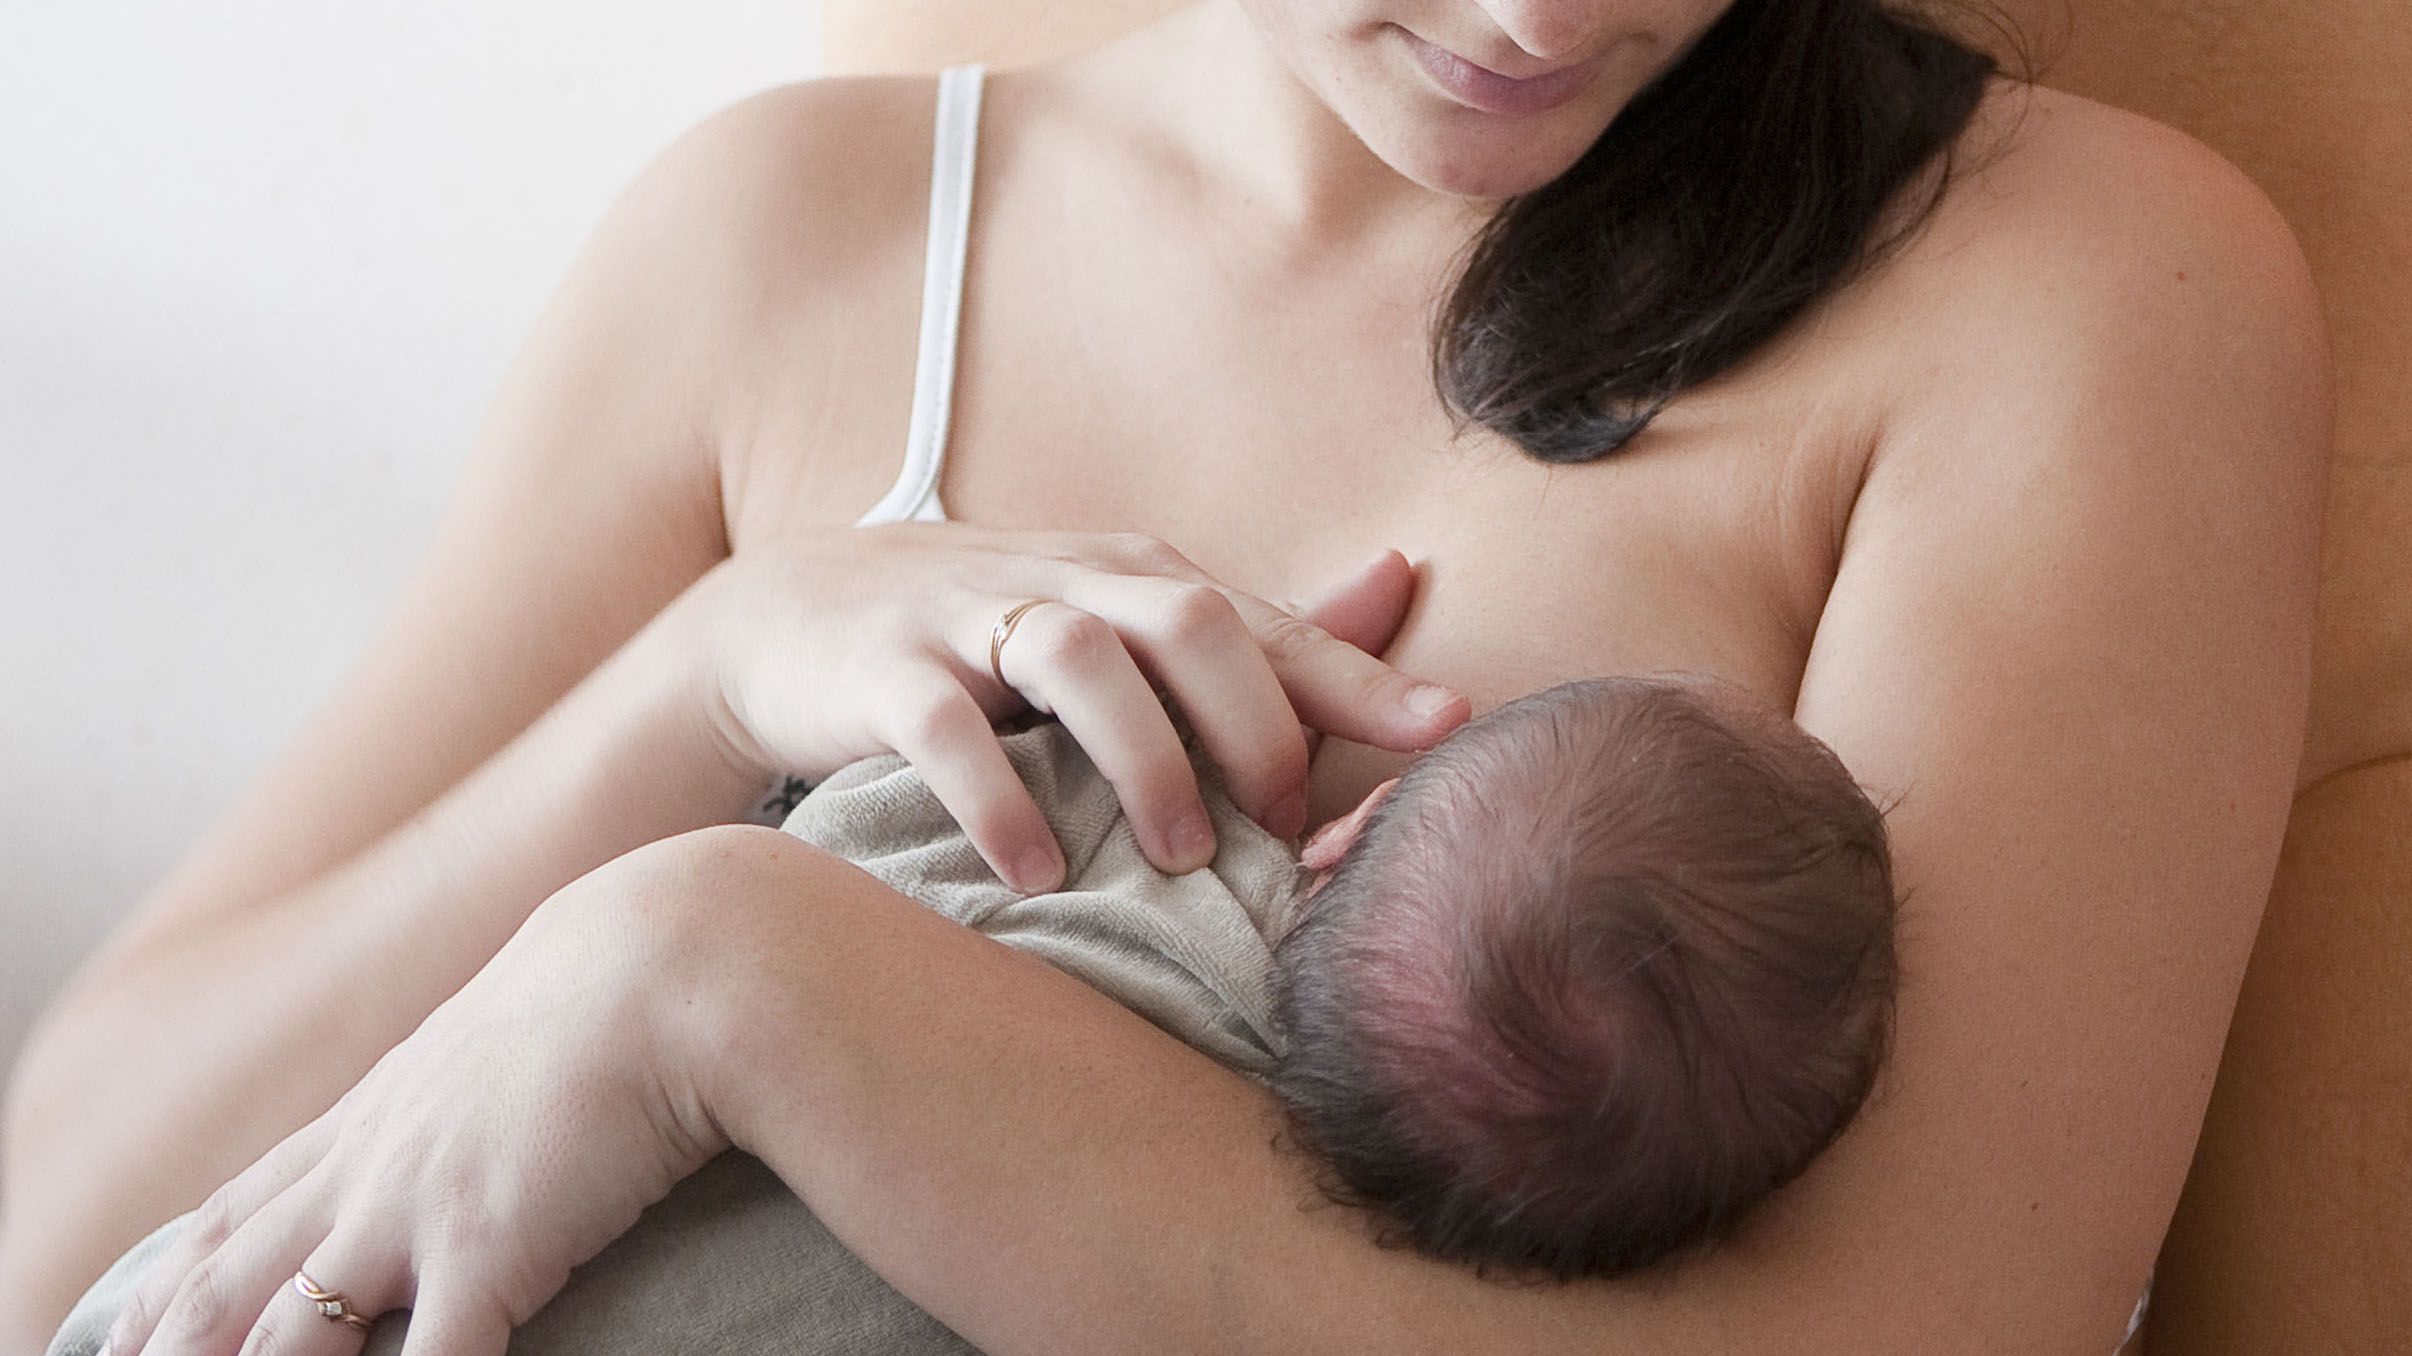 How to Find Breastfeeding Support Near You - The Soccer Mom Blog